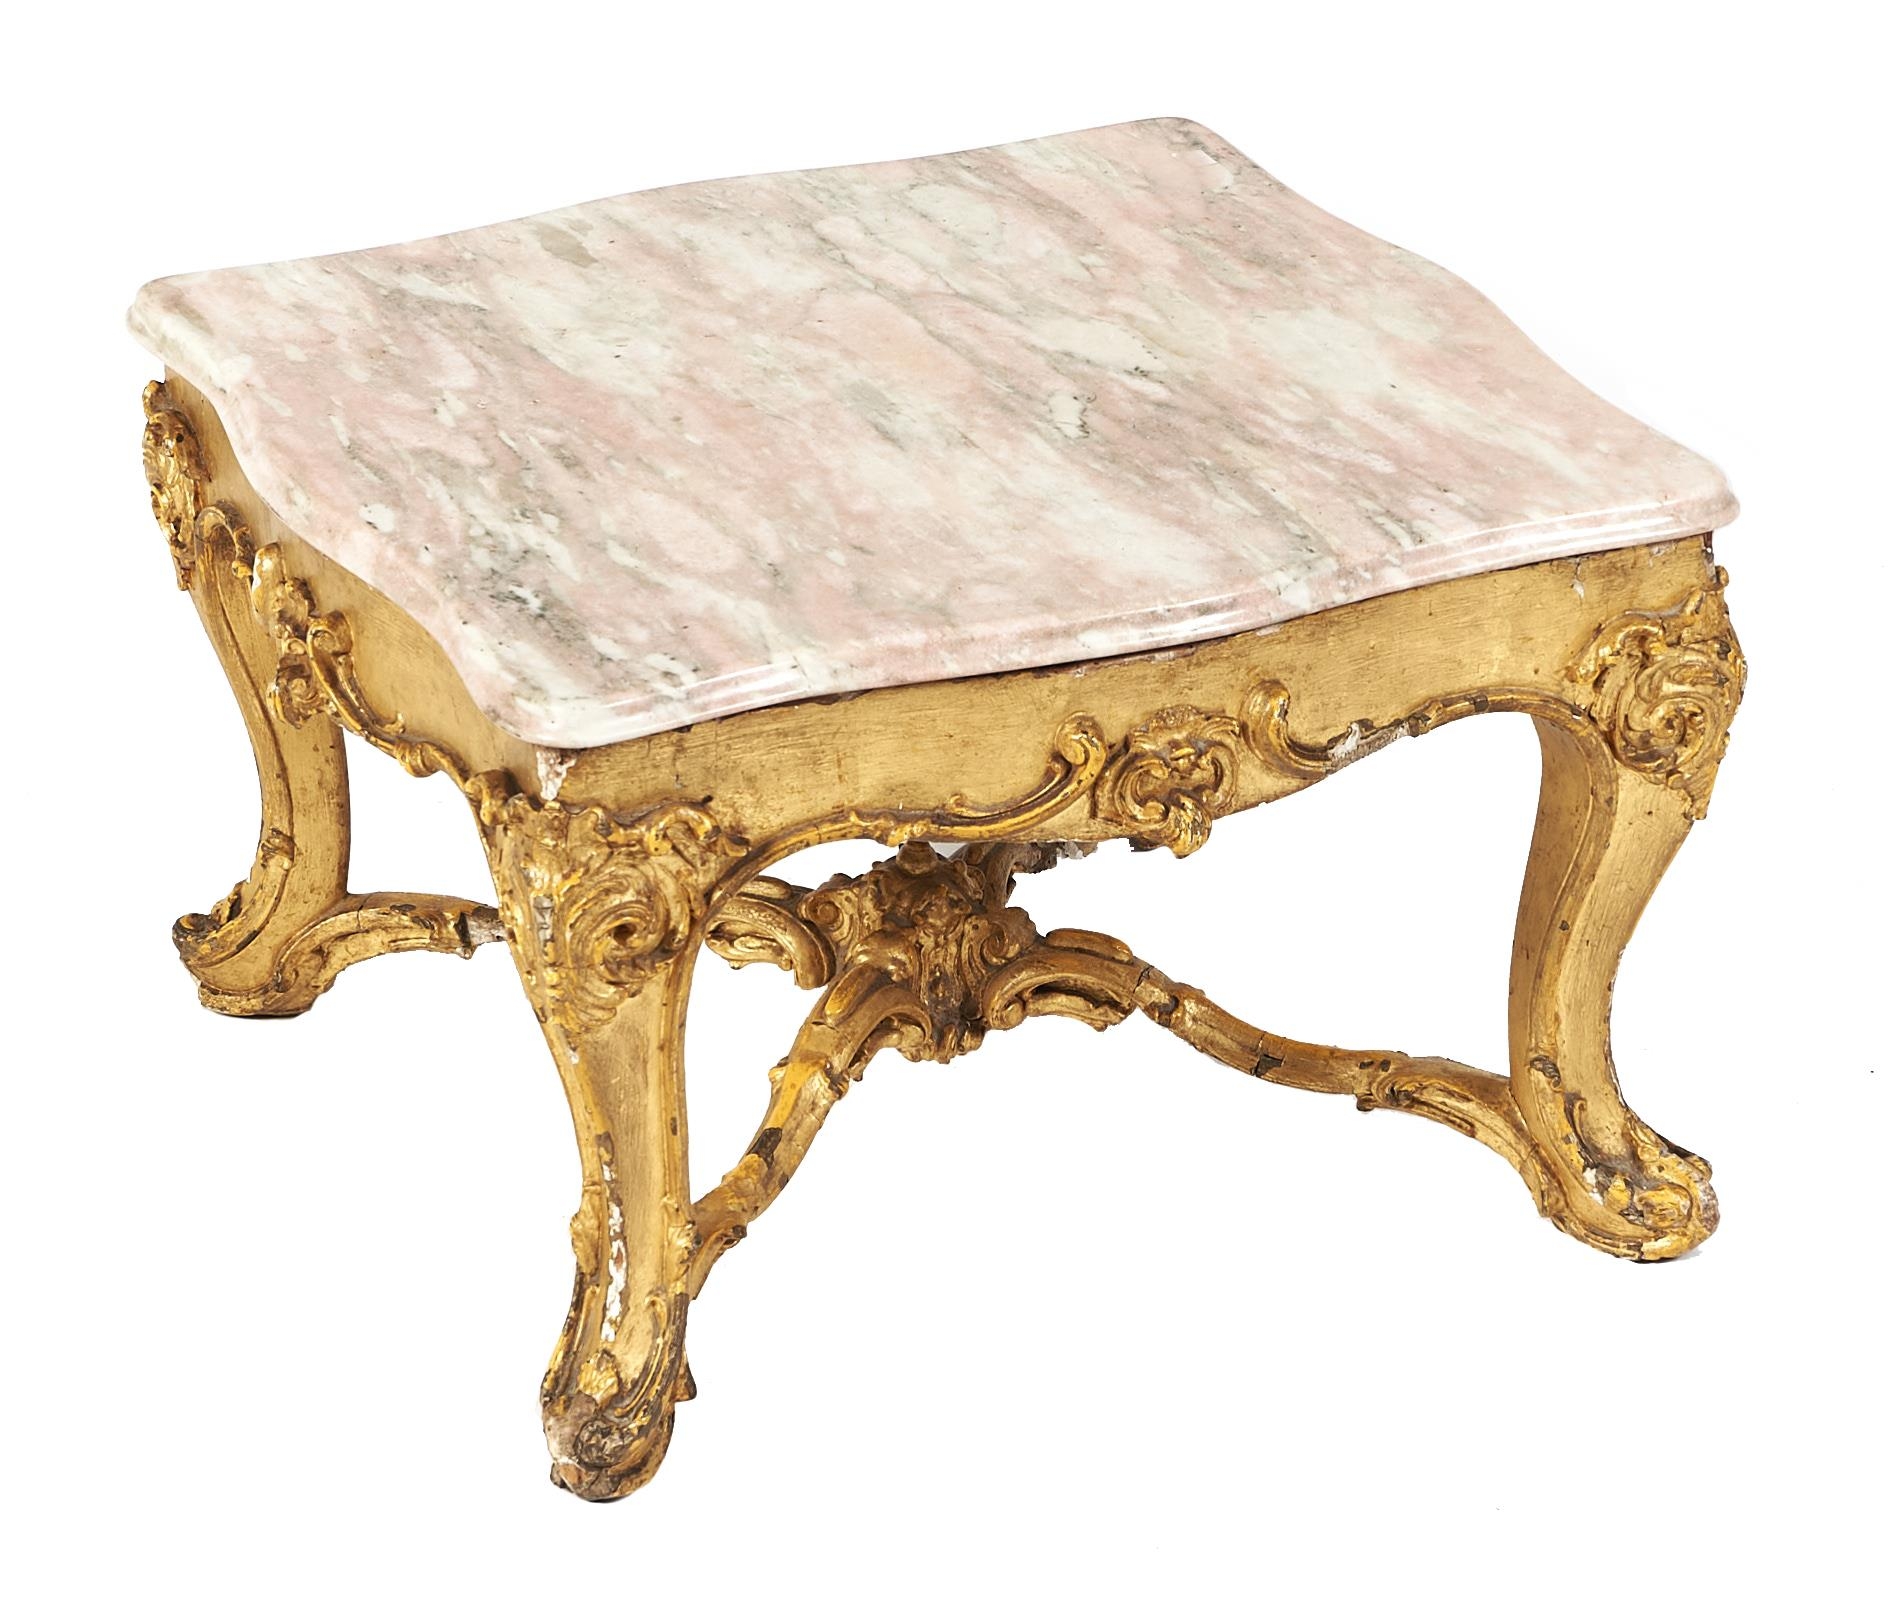 A Victorian giltwood and composition serpentine stool, mid 19th c, adapted as an occasional table